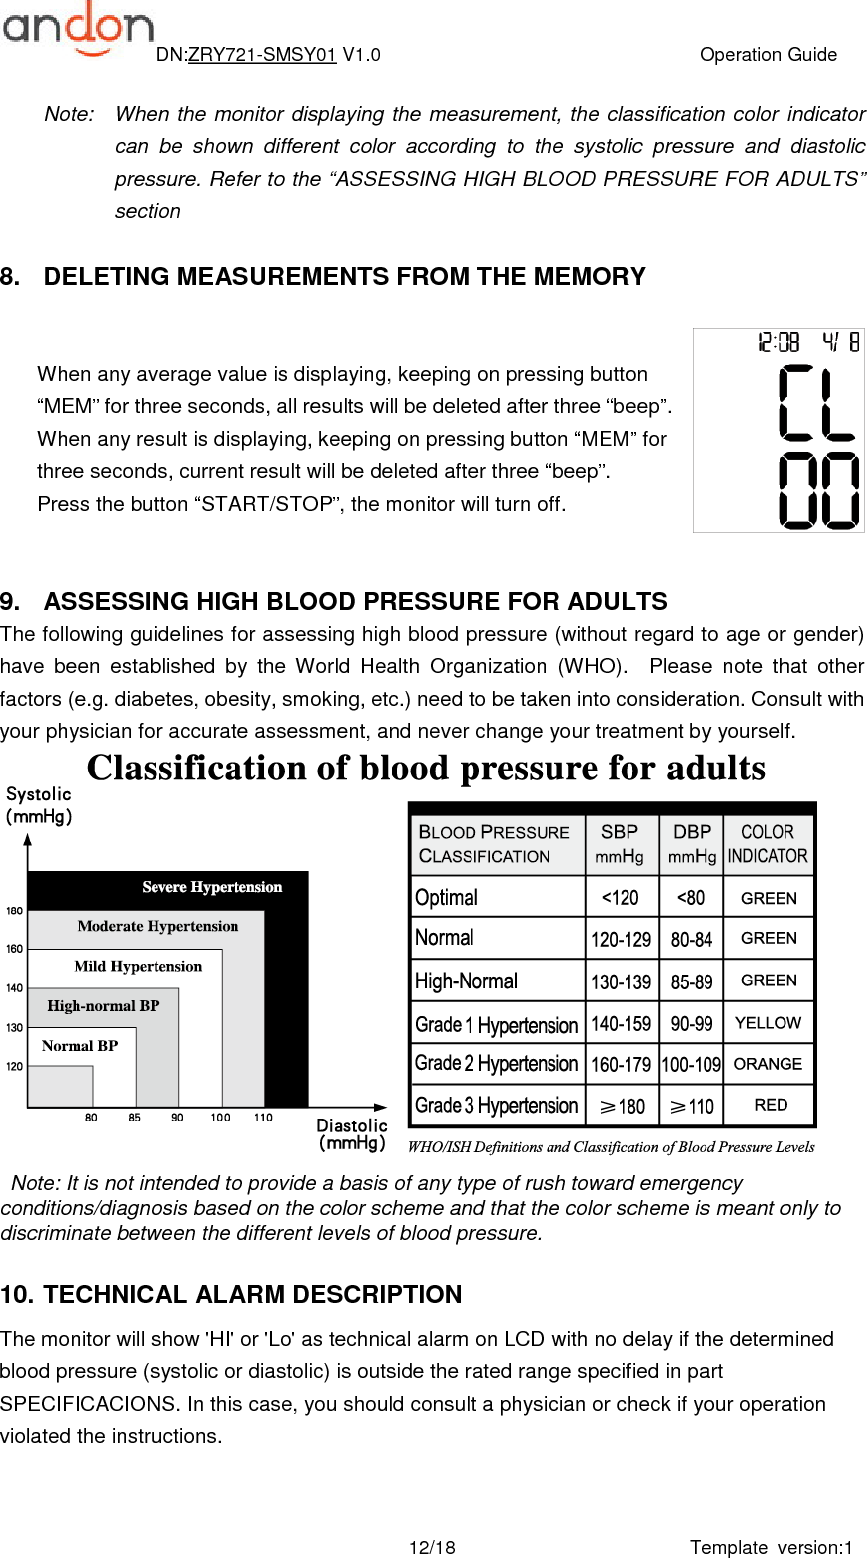 DN:ZRY721-SMSY01 V1.0                                                                    Operation Guide Template  version:1 12/18 Note:    When  the  monitor displaying  the  measurement,  the classification  color indicator can  be  shown  different  color  according  to  the  systolic  pressure  and  diastolic pressure. Refer to the “ASSESSING HIGH BLOOD PRESSURE FOR ADULTS” section  8.  DELETING MEASUREMENTS FROM THE MEMORY   When any average value is displaying, keeping on pressing button “MEM” for three seconds, all results will be deleted after three “beep”.   When any result is displaying, keeping on pressing button “MEM” for three seconds, current result will be deleted after three “beep”. Press the button “START/STOP”, the monitor will turn off.   9.  ASSESSING HIGH BLOOD PRESSURE FOR ADULTS The following guidelines for assessing high blood pressure (without regard to age or gender) have  been  established  by  the  World  Health  Organization  (WHO).    Please  note  that  other factors (e.g. diabetes, obesity, smoking, etc.) need to be taken into consideration. Consult with your physician for accurate assessment, and never change your treatment by yourself.  Note: It is not intended to provide a basis of any type of rush toward emergency conditions/diagnosis based on the color scheme and that the color scheme is meant only to discriminate between the different levels of blood pressure.    10. TECHNICAL ALARM DESCRIPTION The monitor will show &apos;HI&apos; or &apos;Lo&apos; as technical alarm on LCD with no delay if the determined blood pressure (systolic or diastolic) is outside the rated range specified in part SPECIFICACIONS. In this case, you should consult a physician or check if your operation violated the instructions. 